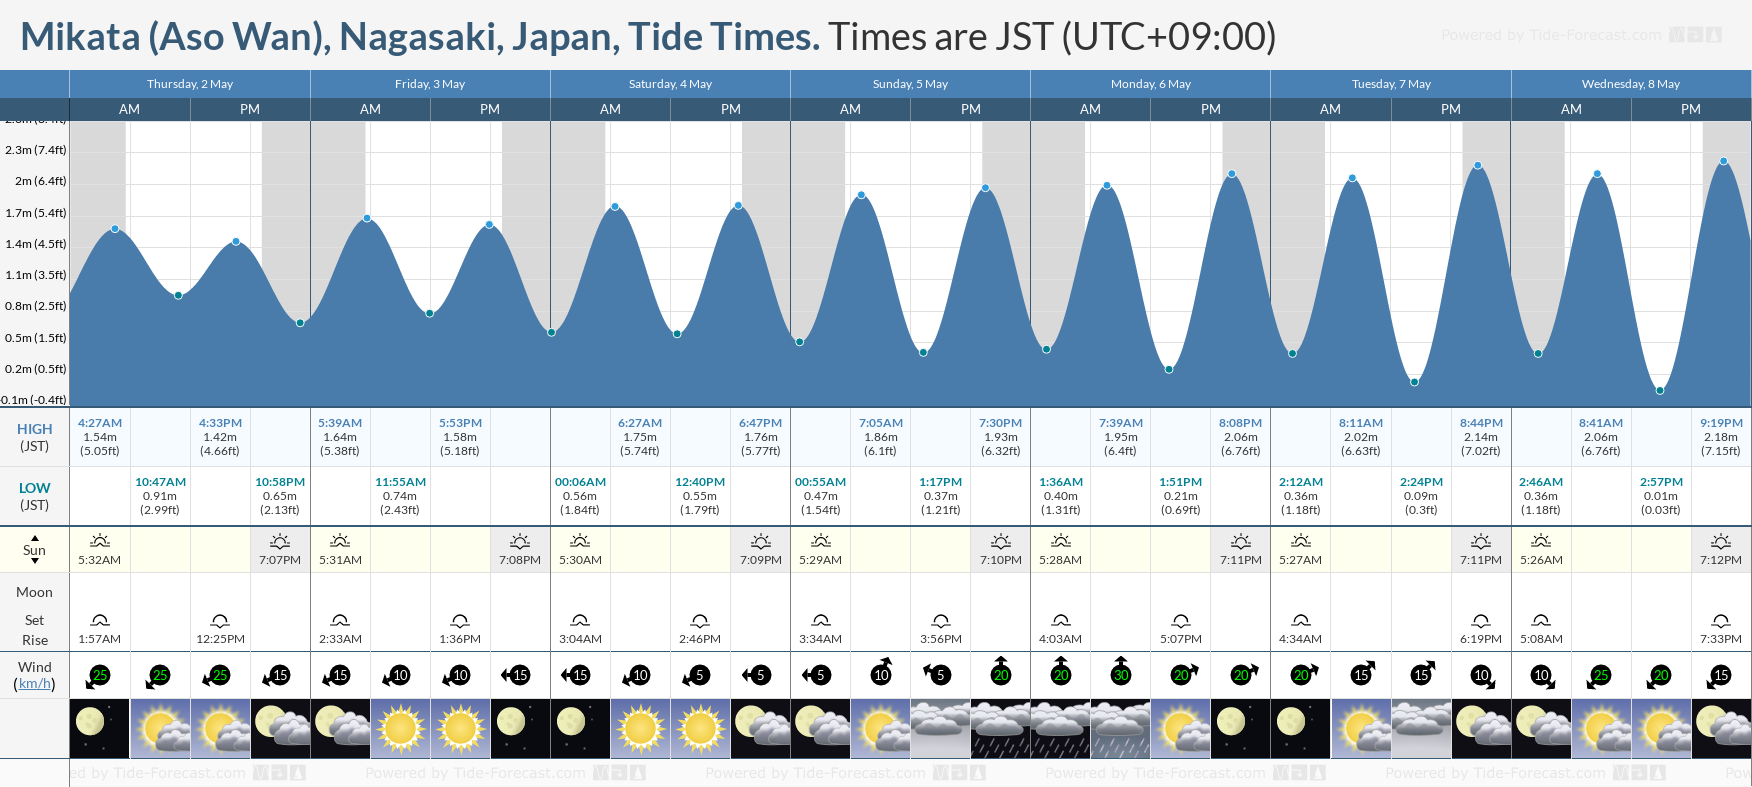 Mikata (Aso Wan), Nagasaki, Japan Tide Chart including high and low tide tide times for the next 7 days